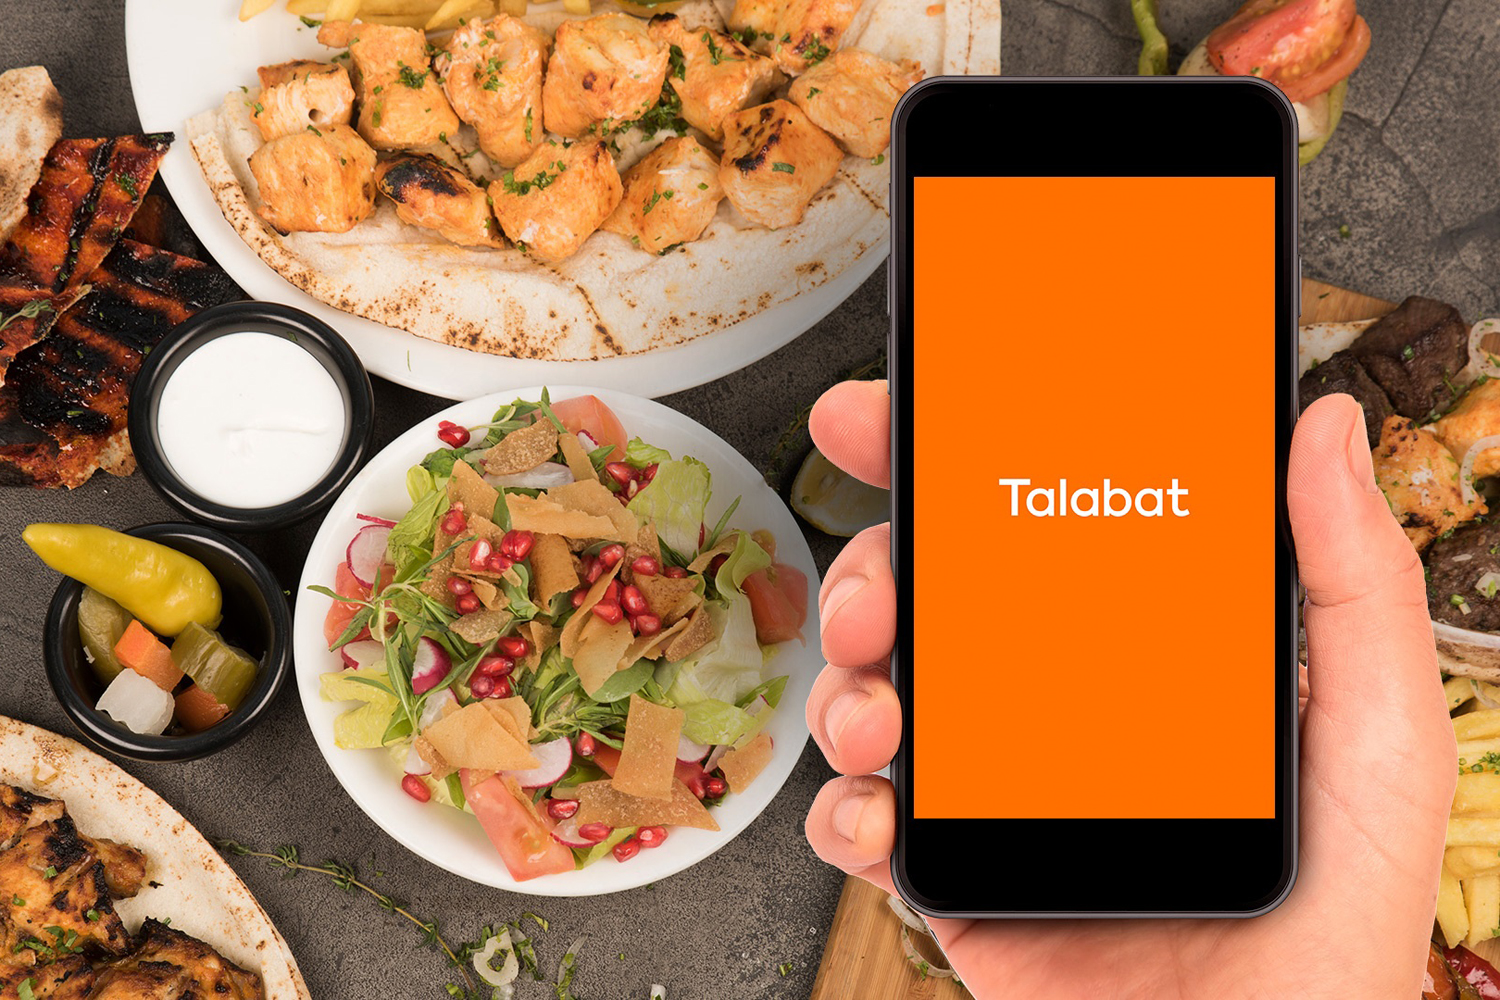 Uae Delivery Company Talabat Waives Delivery Fee | Time Out Dubai